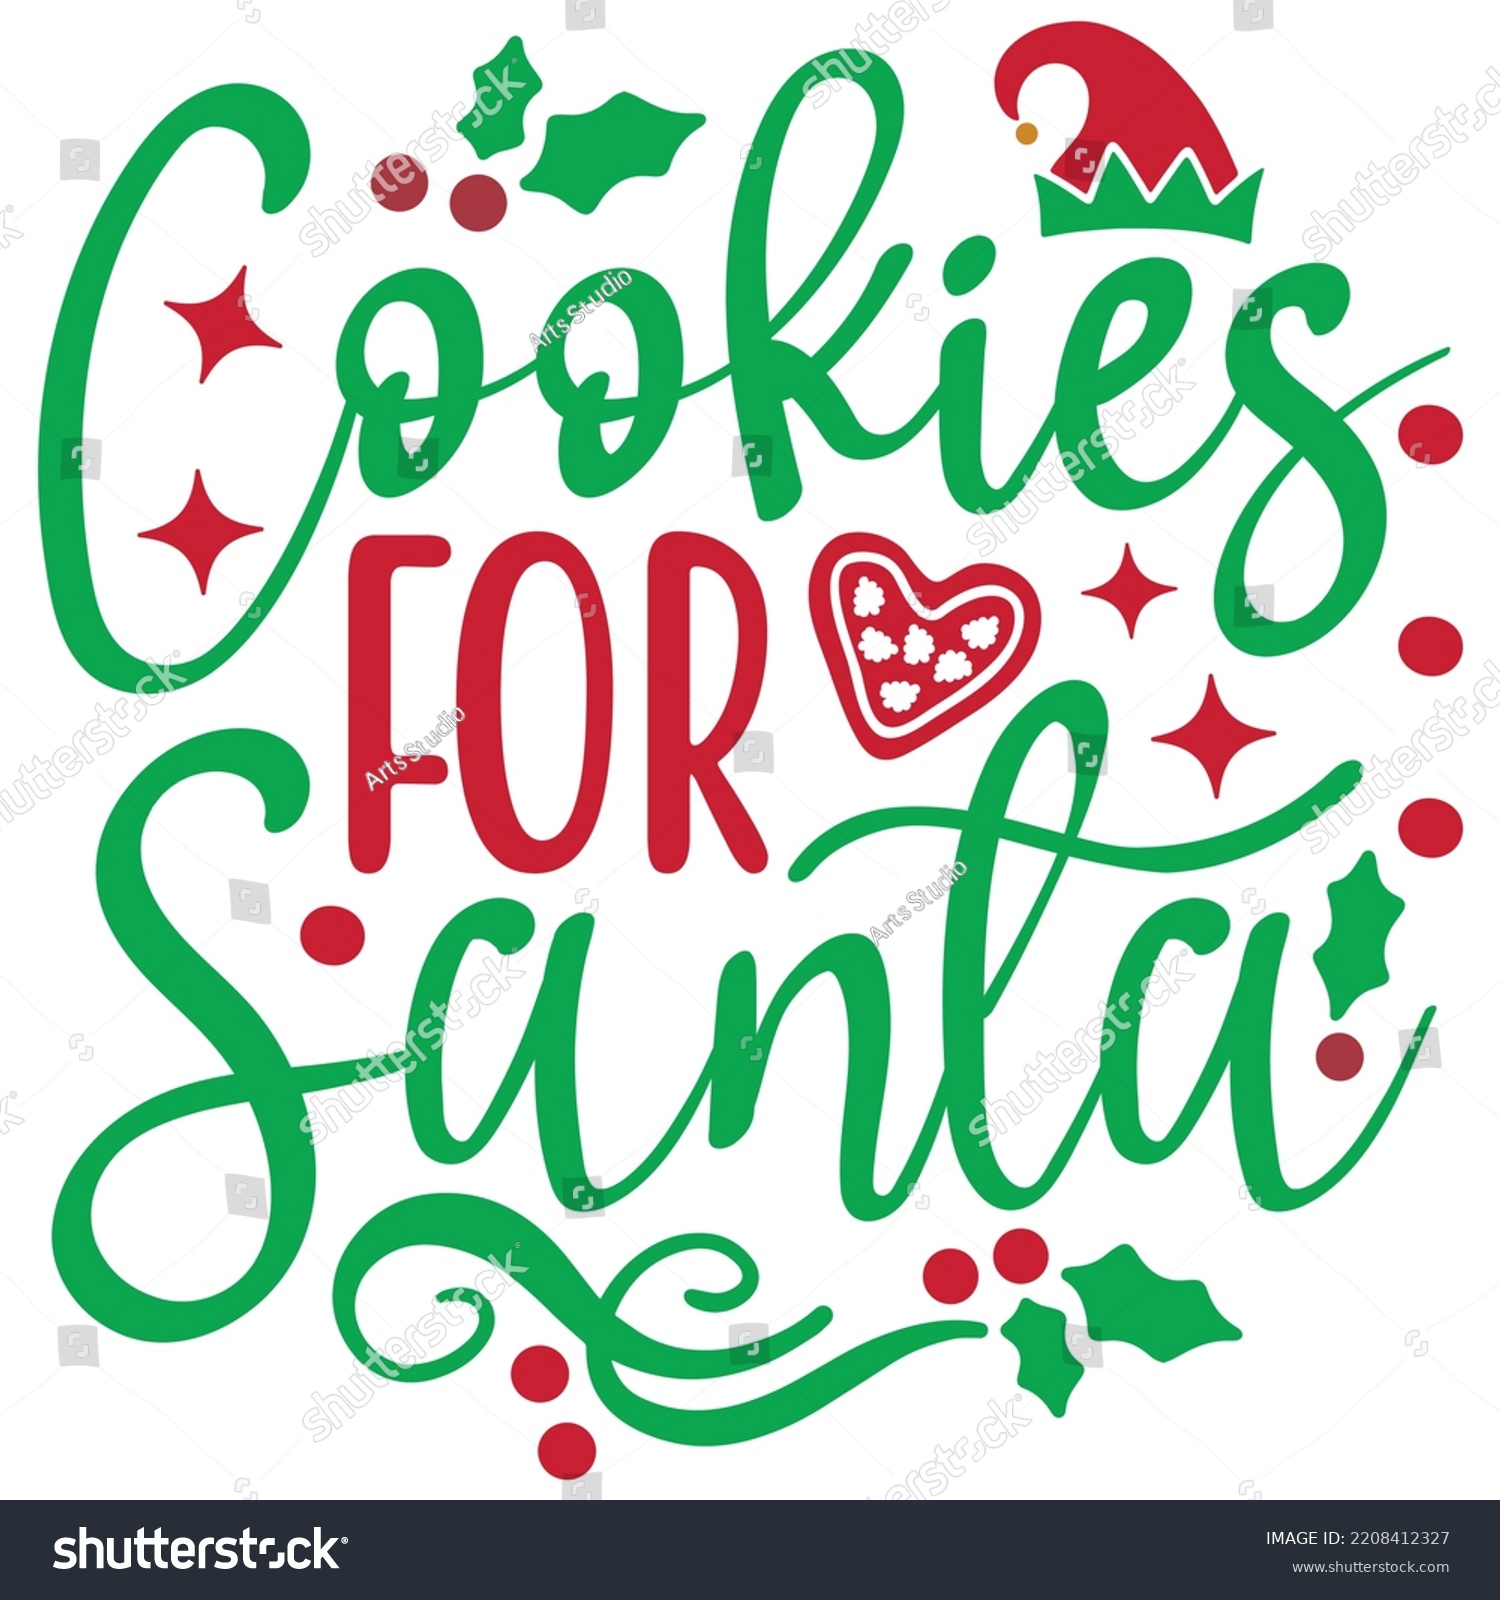 SVG of Cookies For Santa - Happy Christmas, Happy New Year, Merry Christmas, Happy Holidays T-shirt And SVG Design, Can You Download This Vector File svg